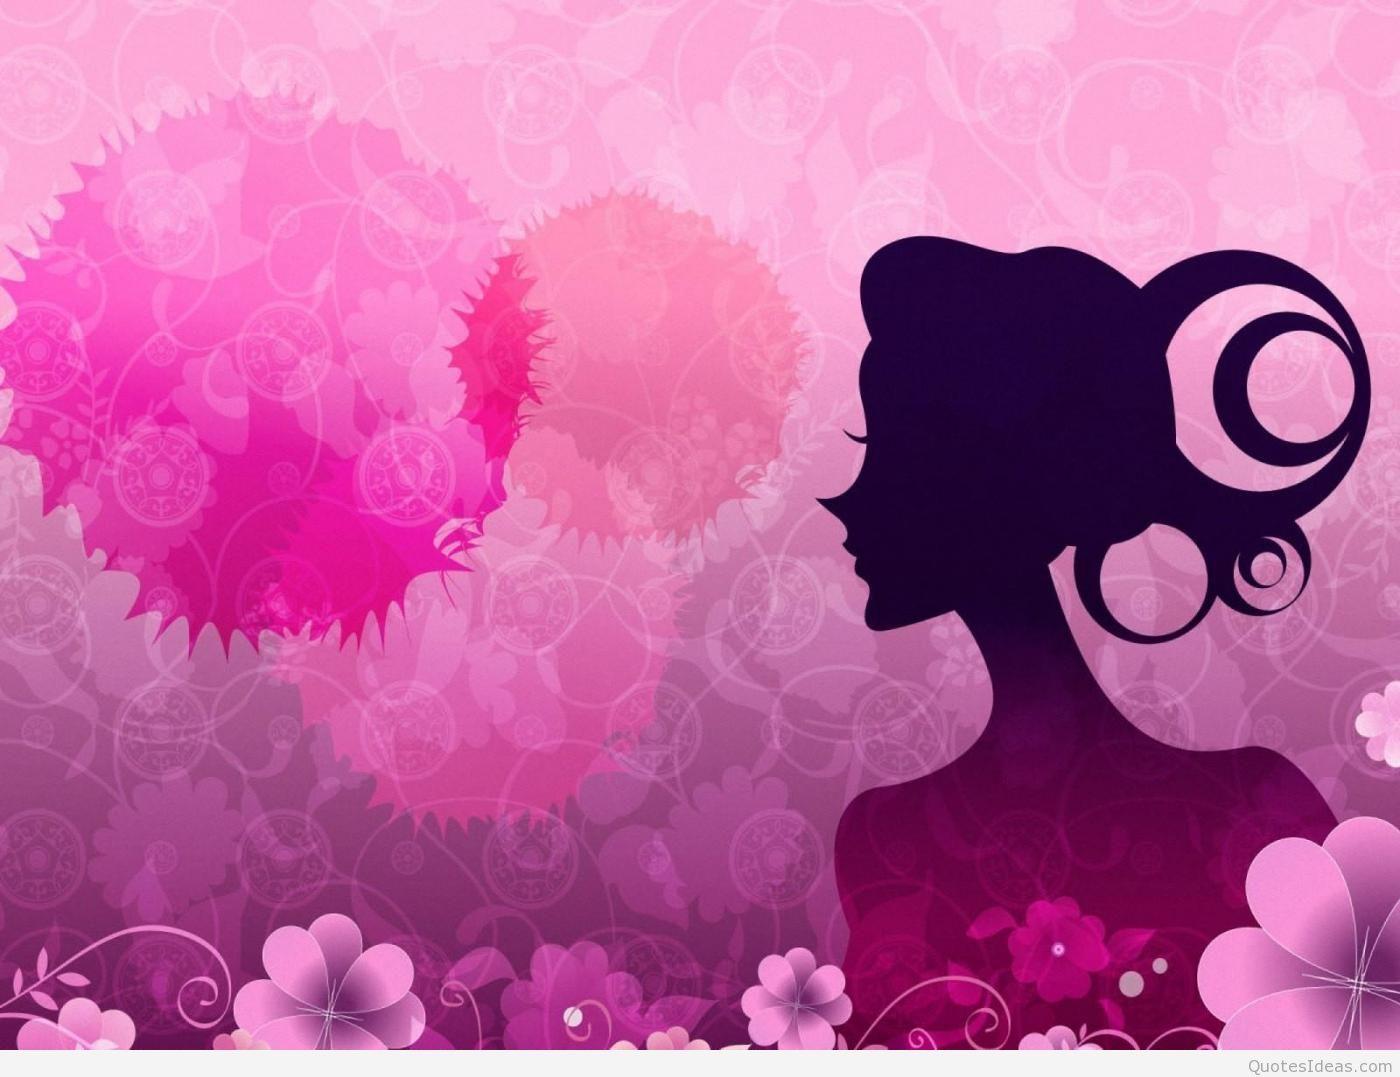 Happy Women's Day Wallpapers - Top Free Happy Women's Day Backgrounds ...